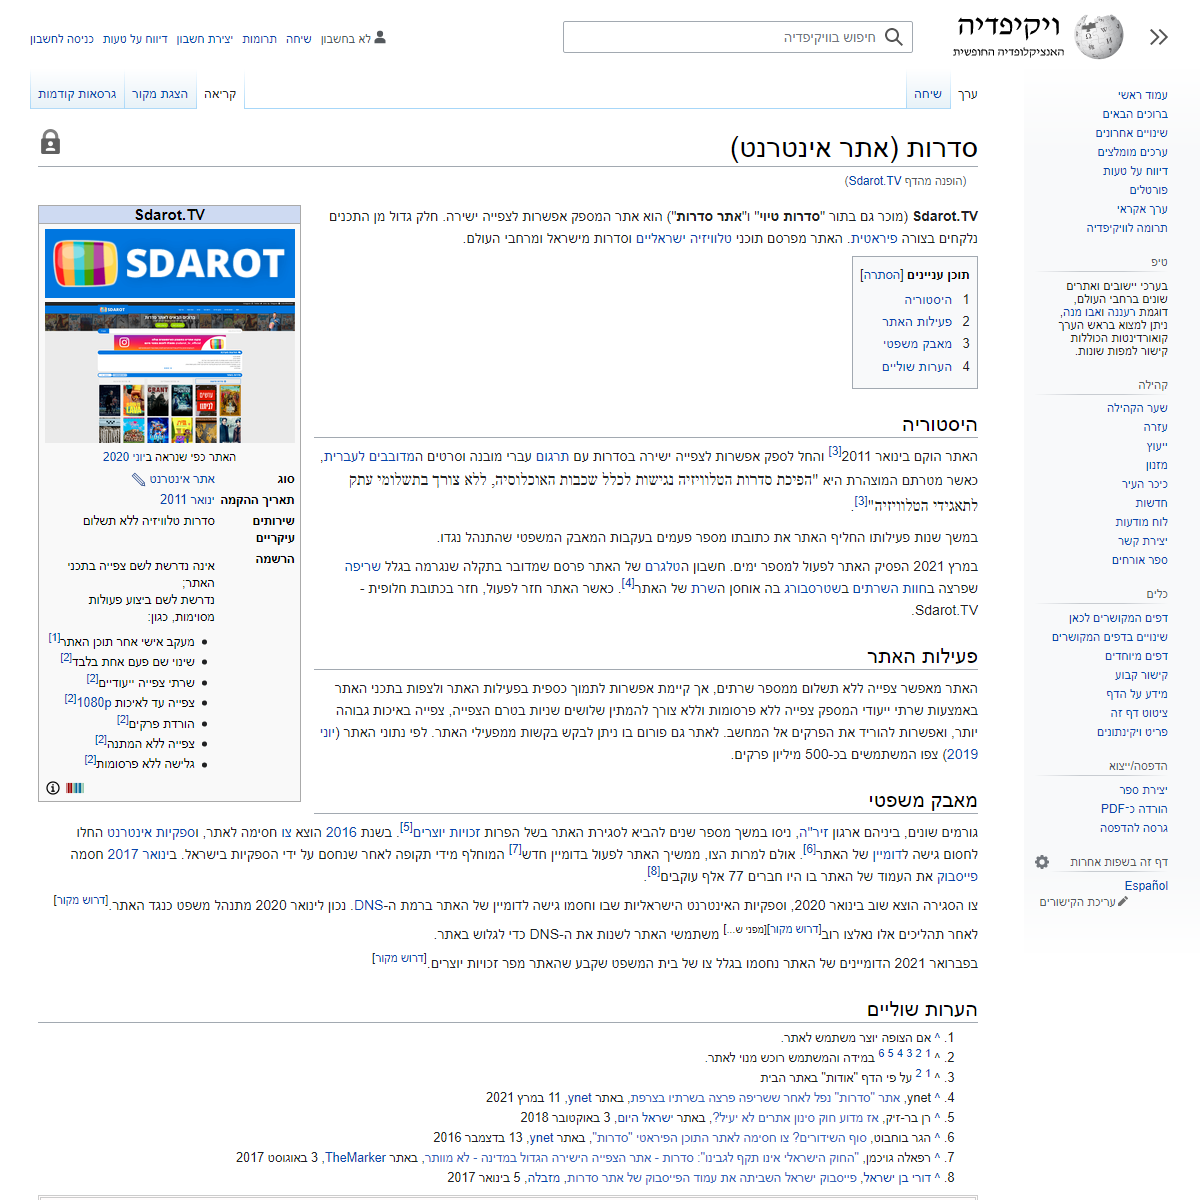 A complete backup of https://he.wikipedia.org/wiki/Sdarot.TV